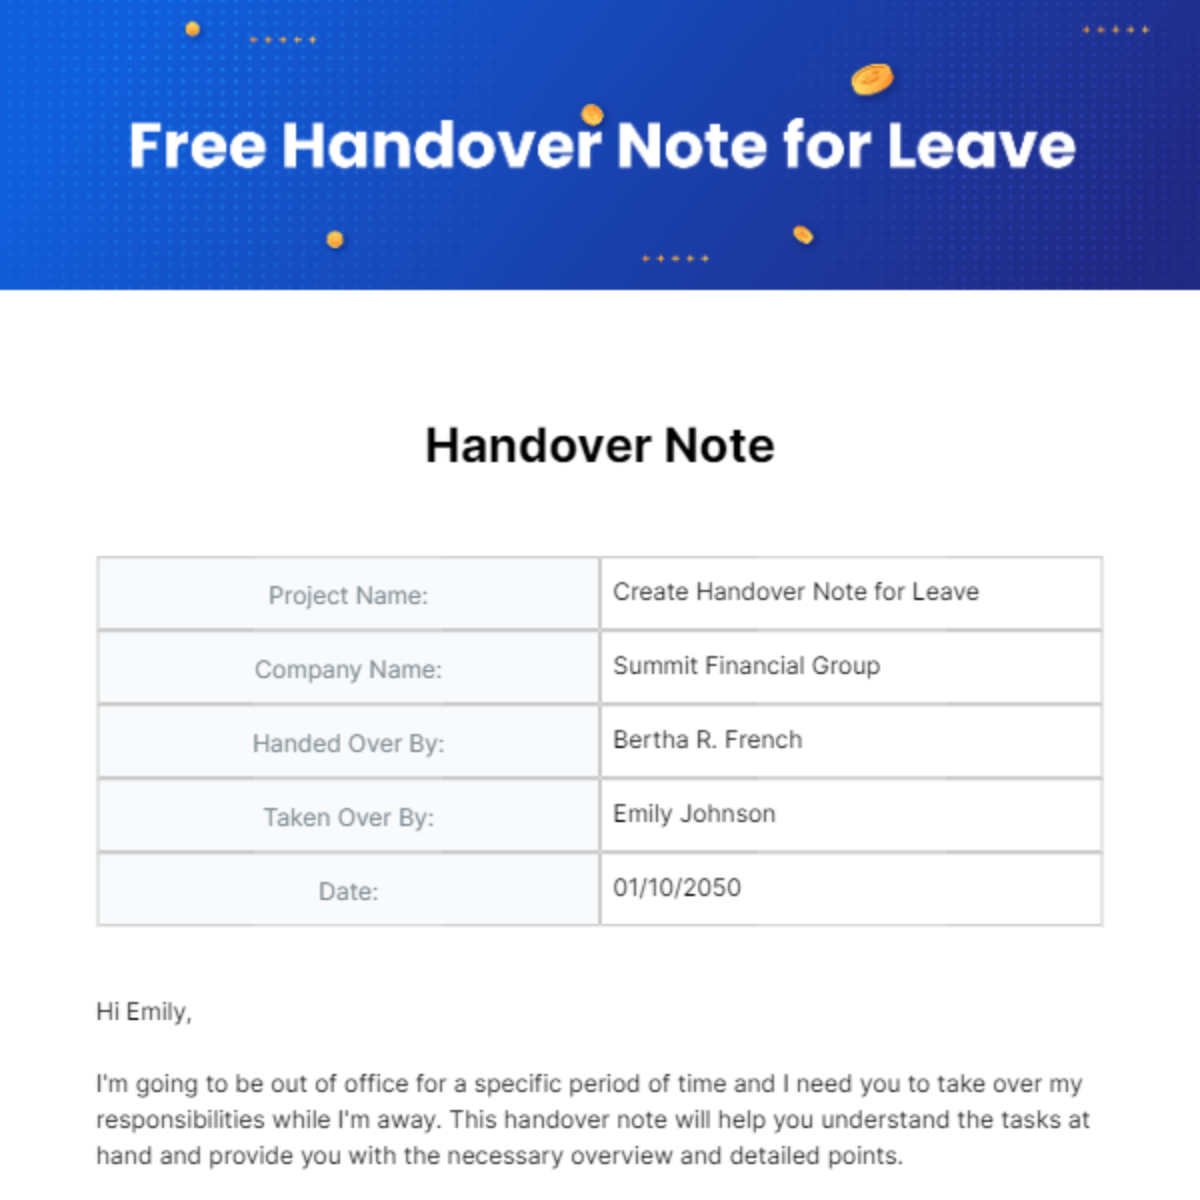 Handover Note for Leave Template